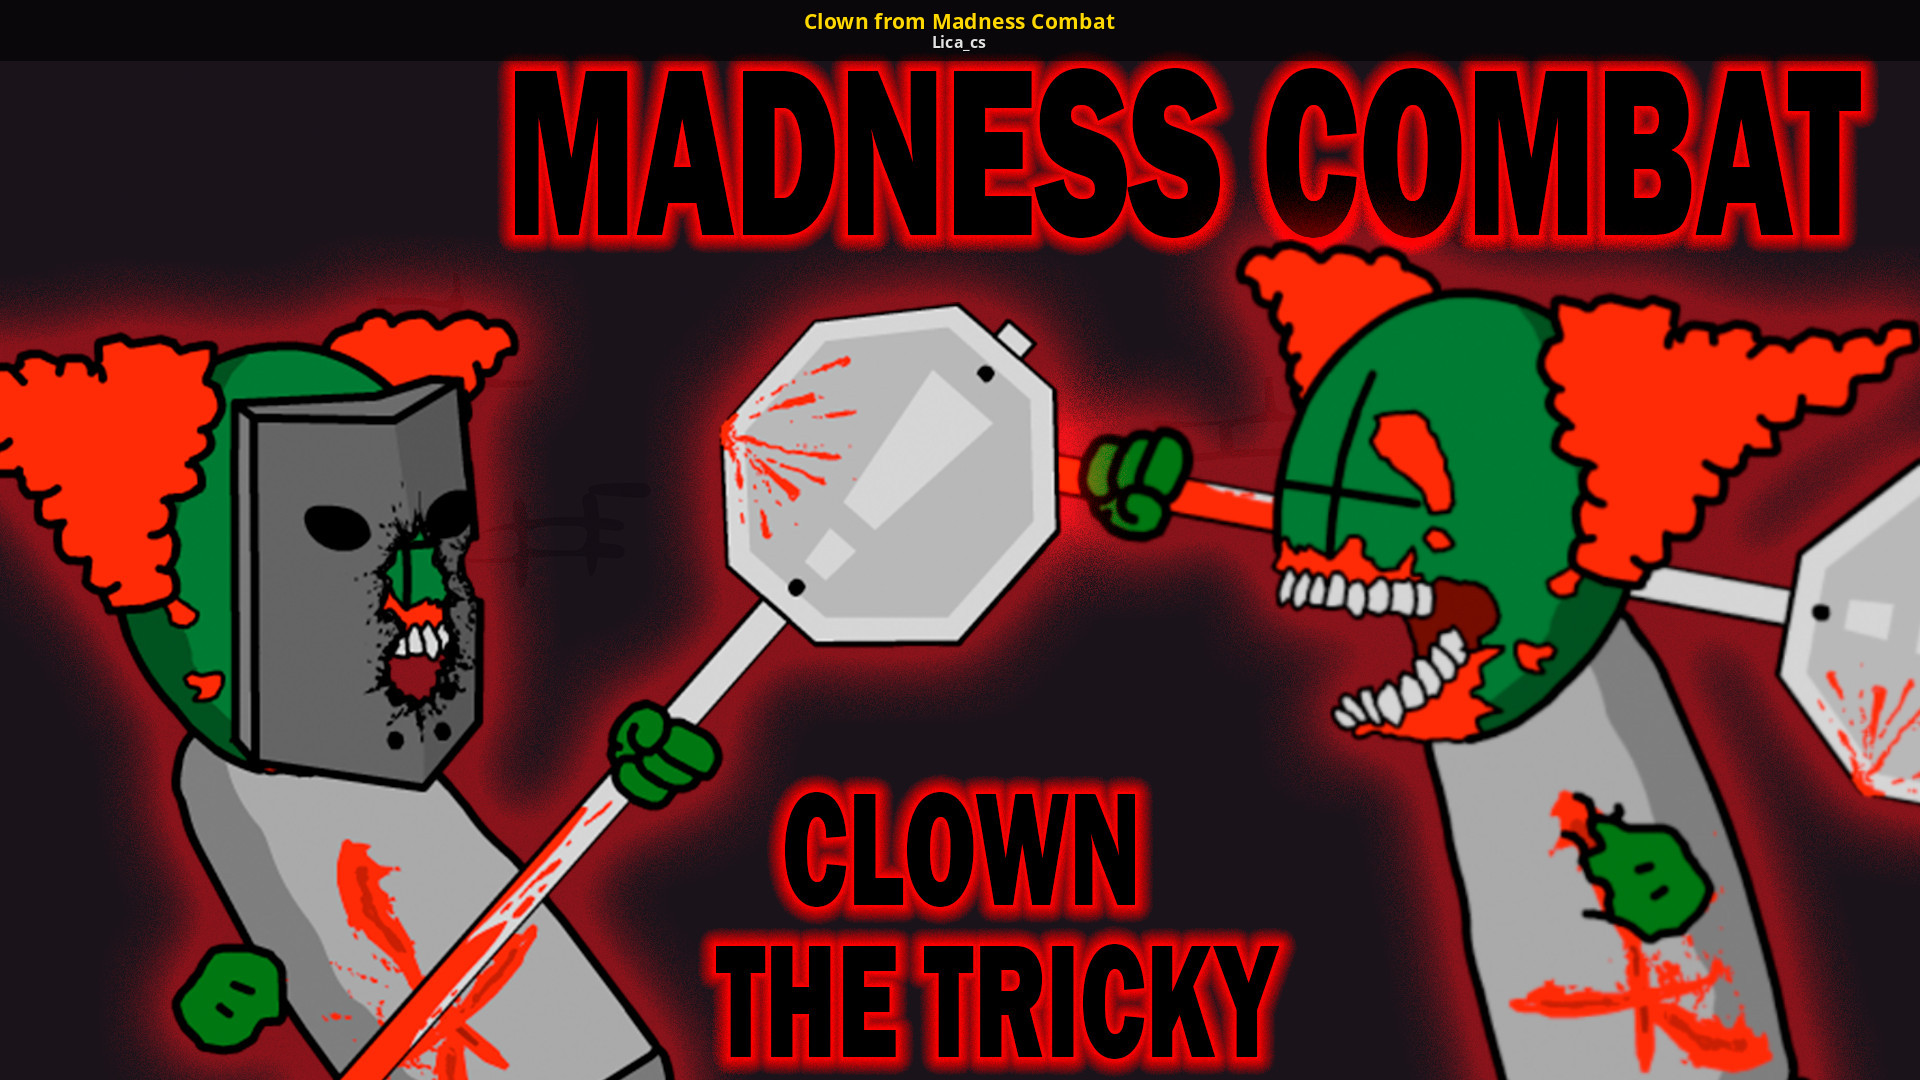 Clown from Madness Combat [Friday Night Funkin'] [Mods]